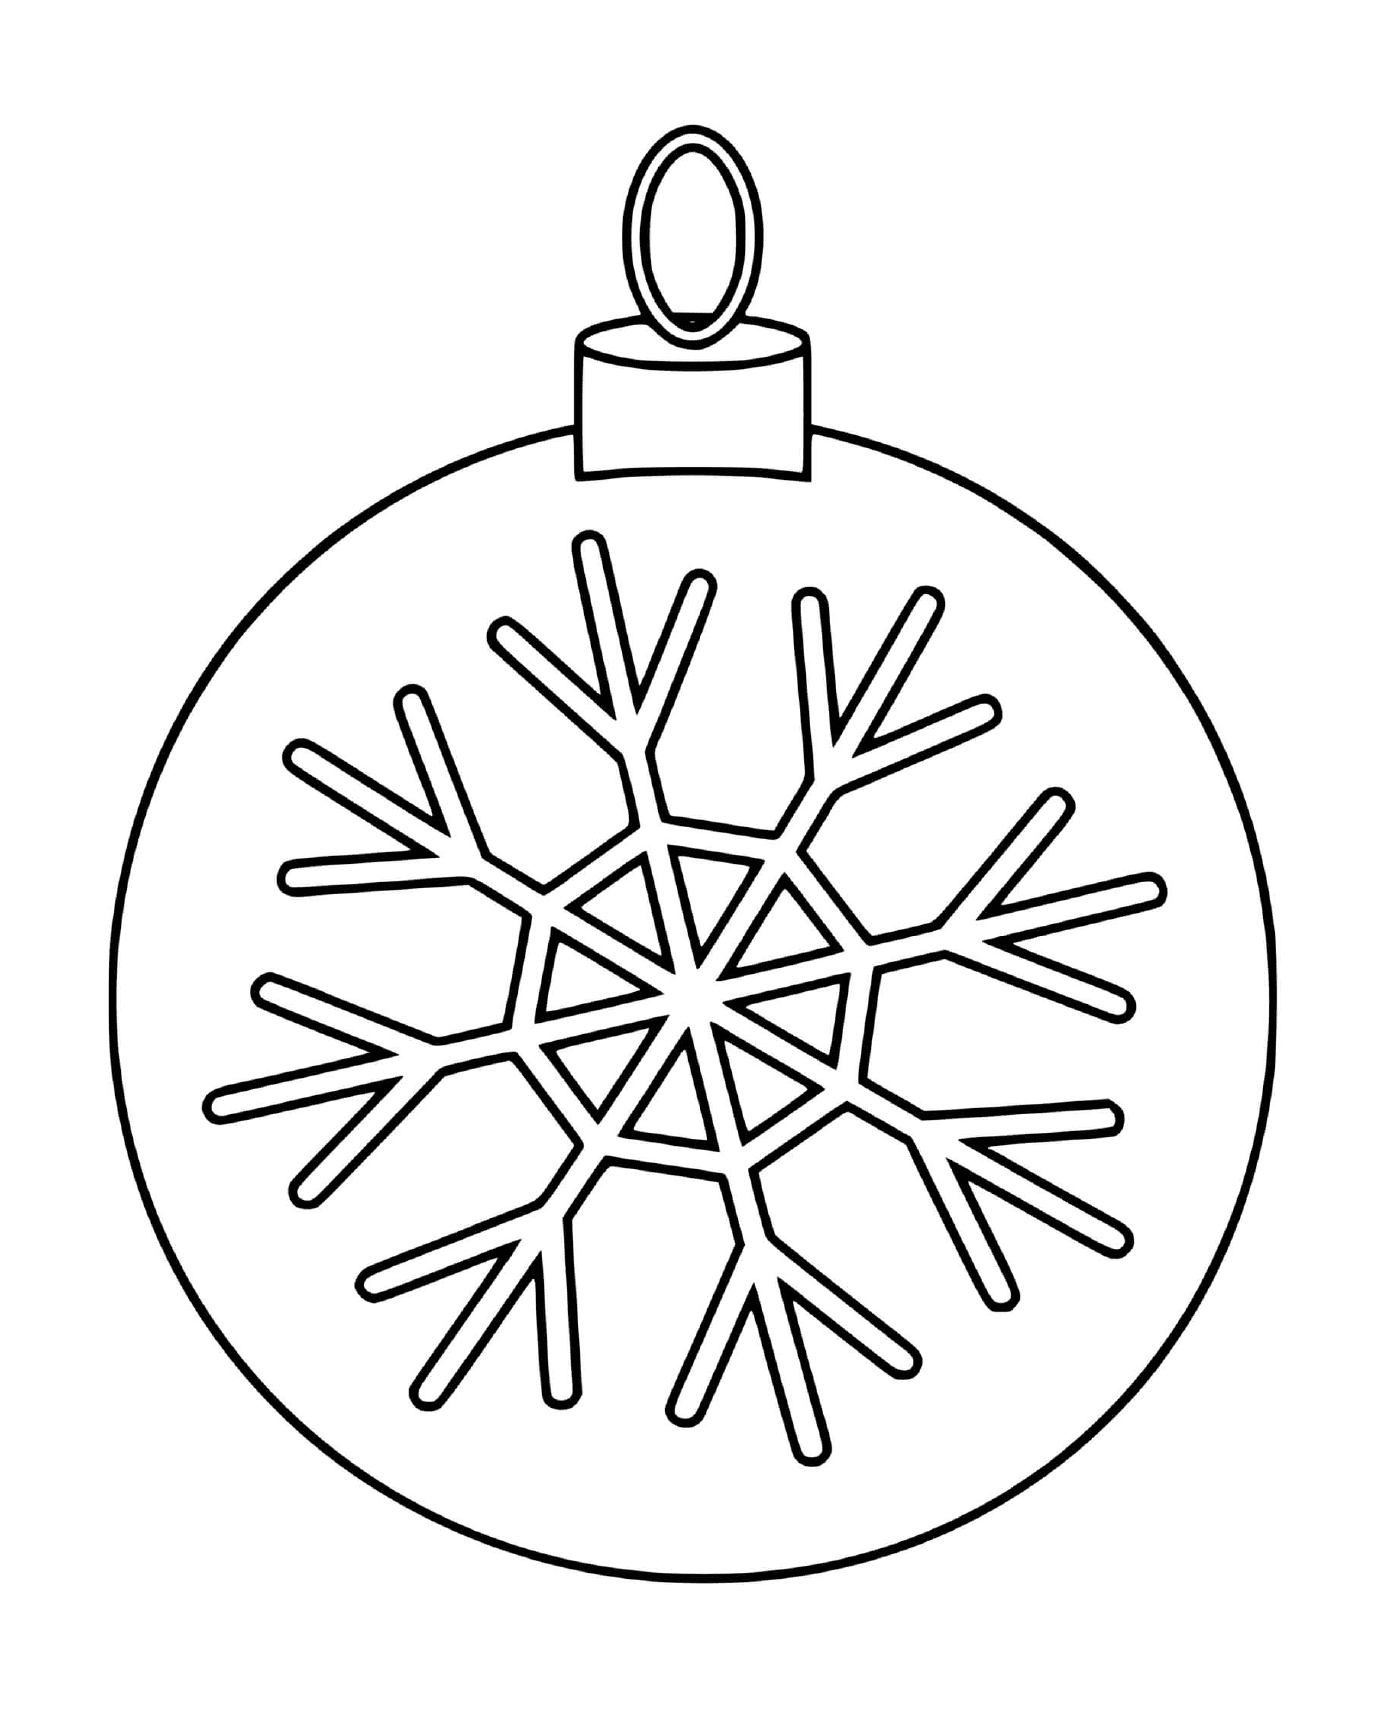  A Christmas ball with a snowflake for a tree 